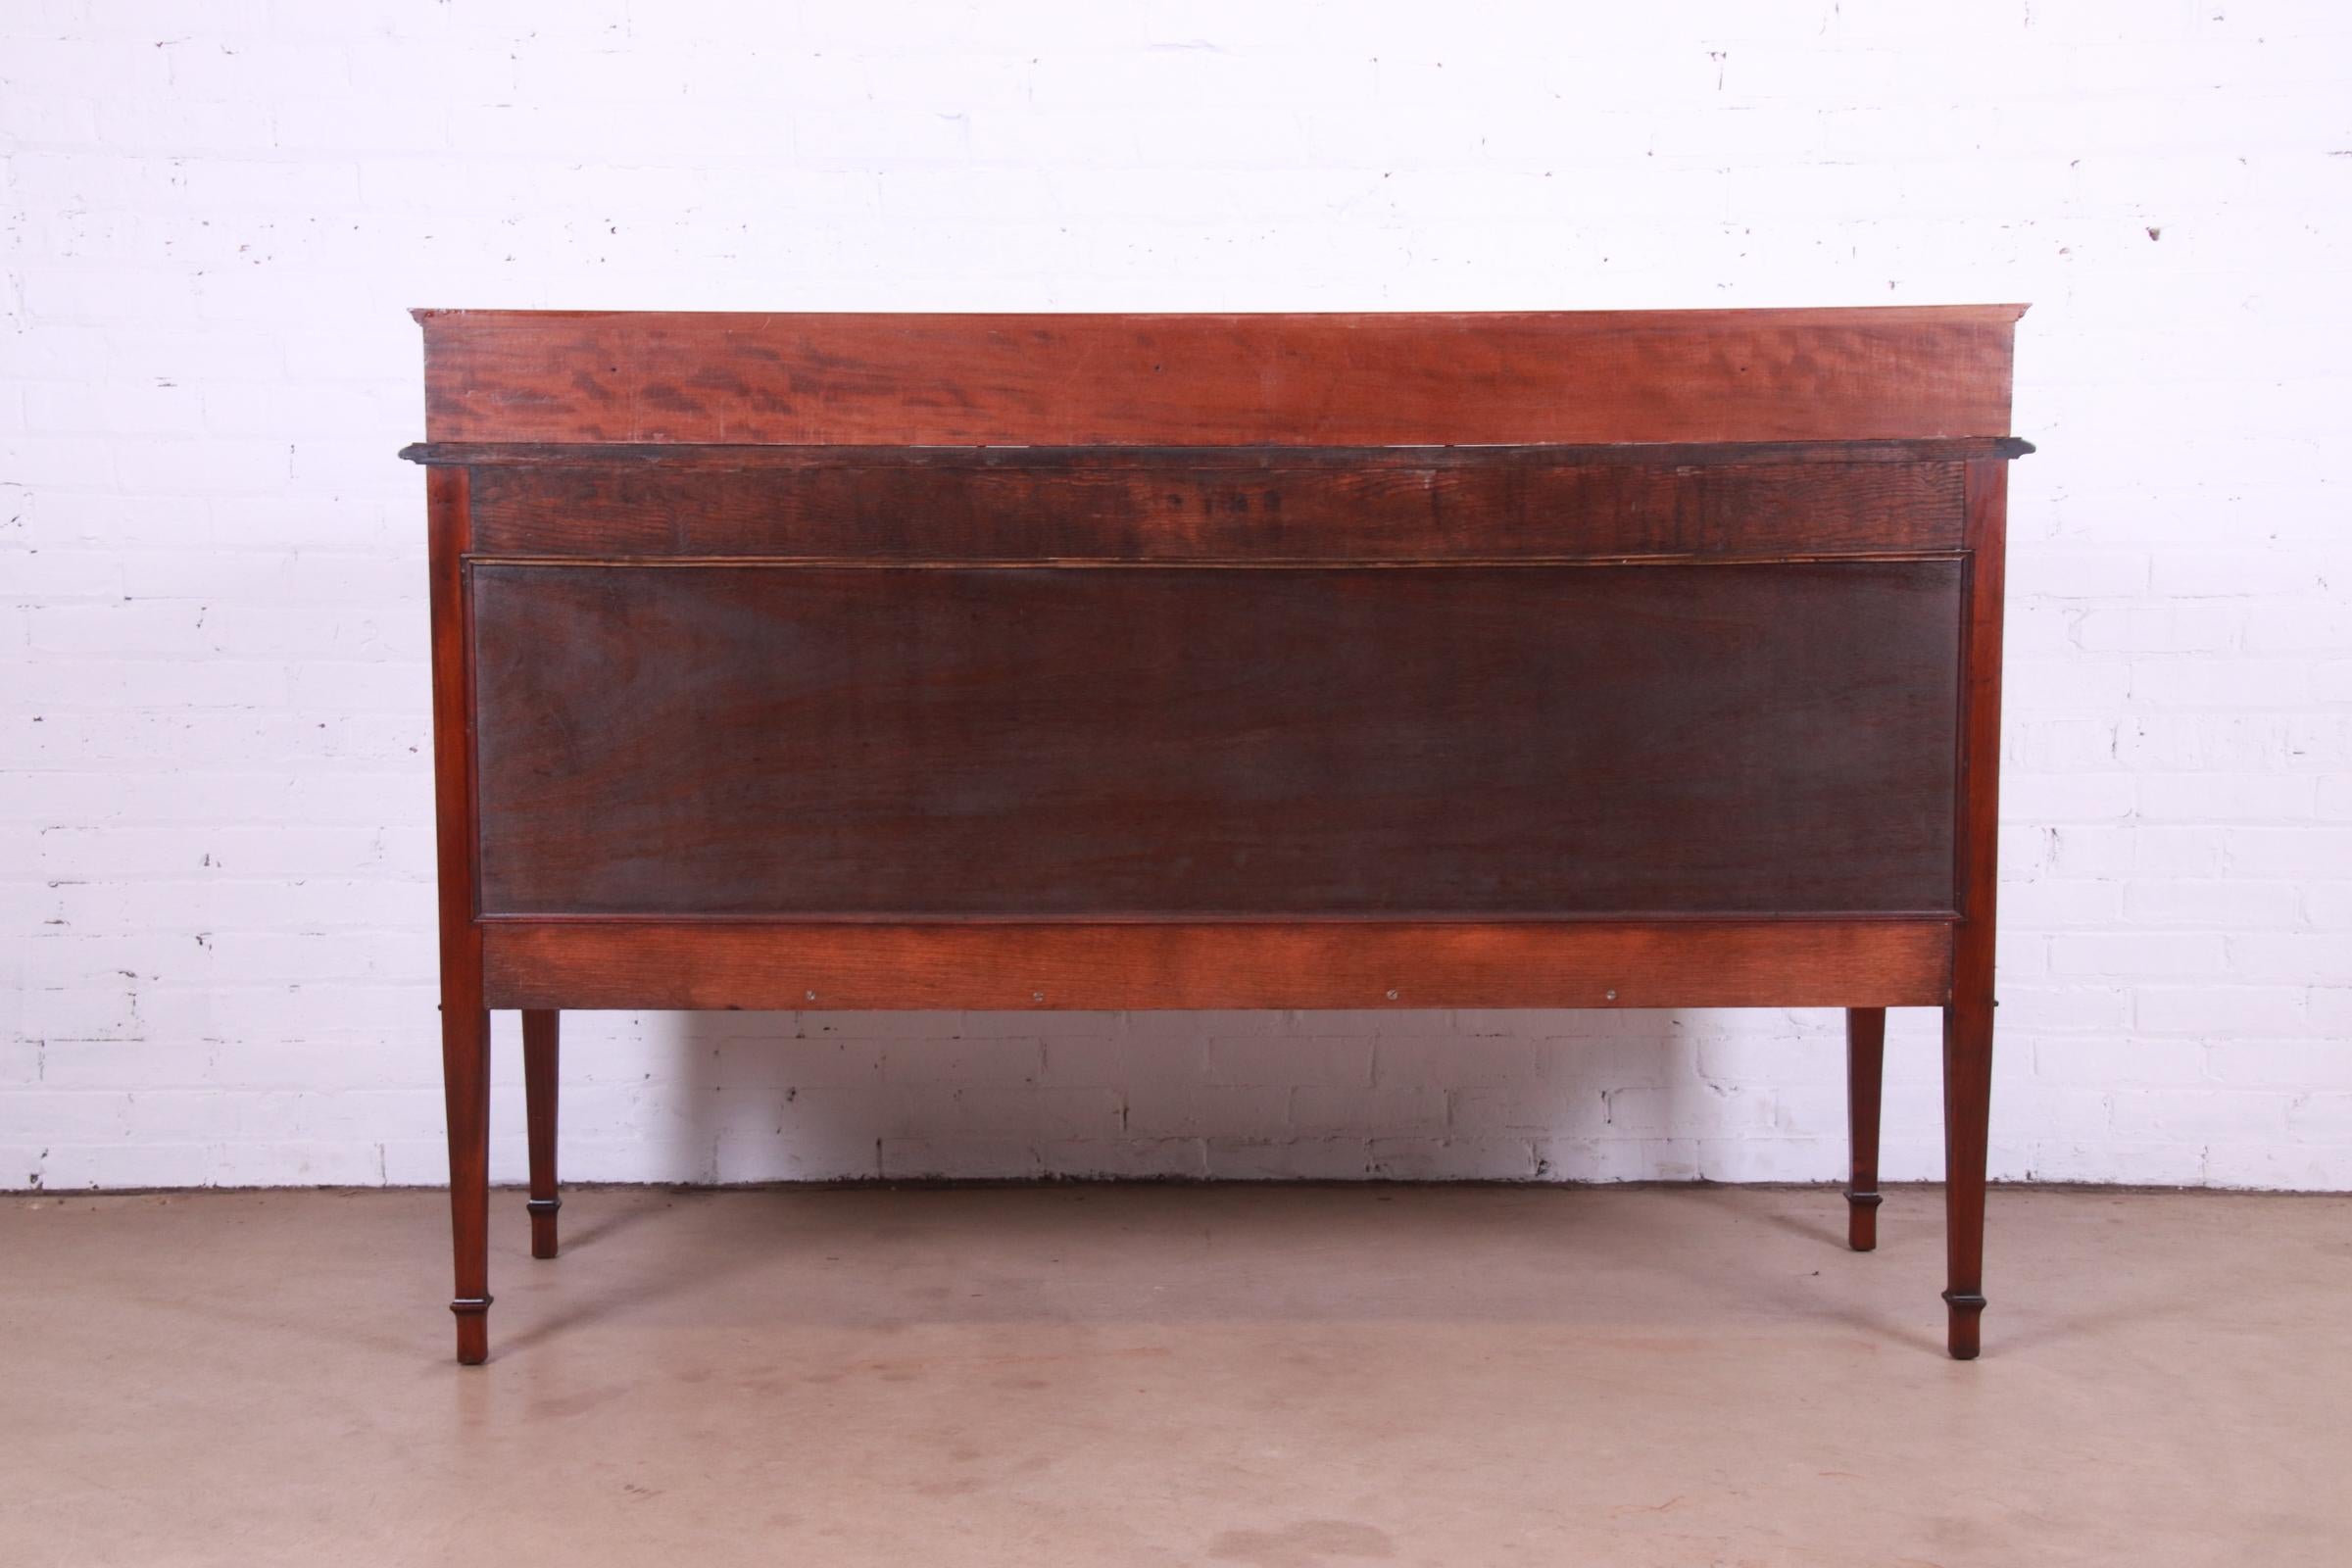 Antique French Regency Louis XVI Style Carved Mahogany Sideboard or Bar Cabinet For Sale 13